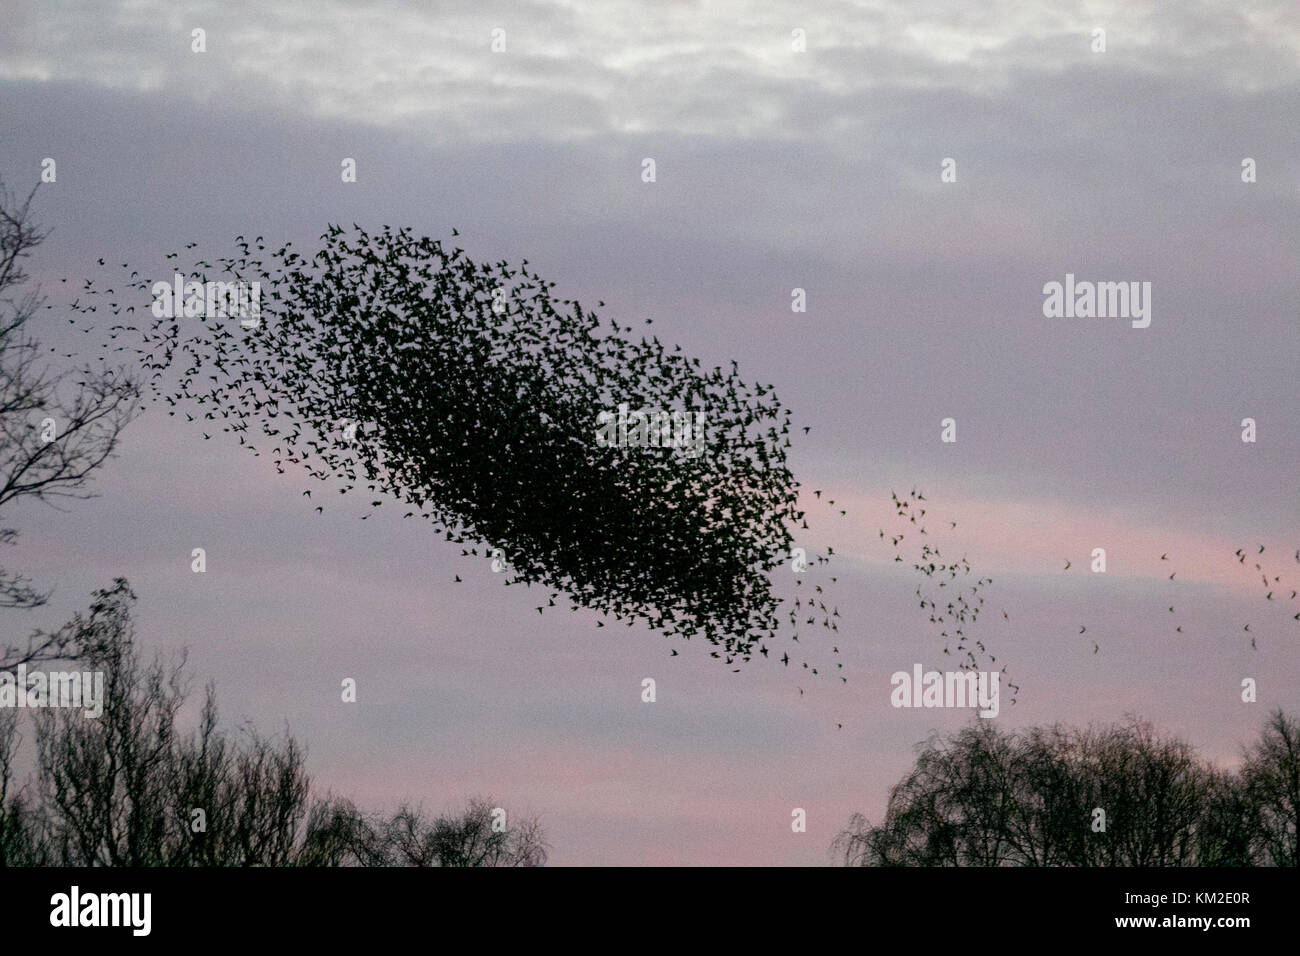 Burscough, Lancashire.  UK Weather. 3rd December, 2017. Thousands of starling seeking a communal roost in the reed beds at Martin Mere, are harried and pursed by a resident peregrine falcon.  The shapes and swirls form part of an evasive technique to survive and to confound and dazzle the bird of prey. The larger the simulated flocks, the harder it is for the predators to single out and catch an individual bird. Starlings can fly swiftly in coordinated and mesmerising formations as a group action to survive the attack. Credit: MediaWorldImages/AlamyLiveNews. Stock Photo